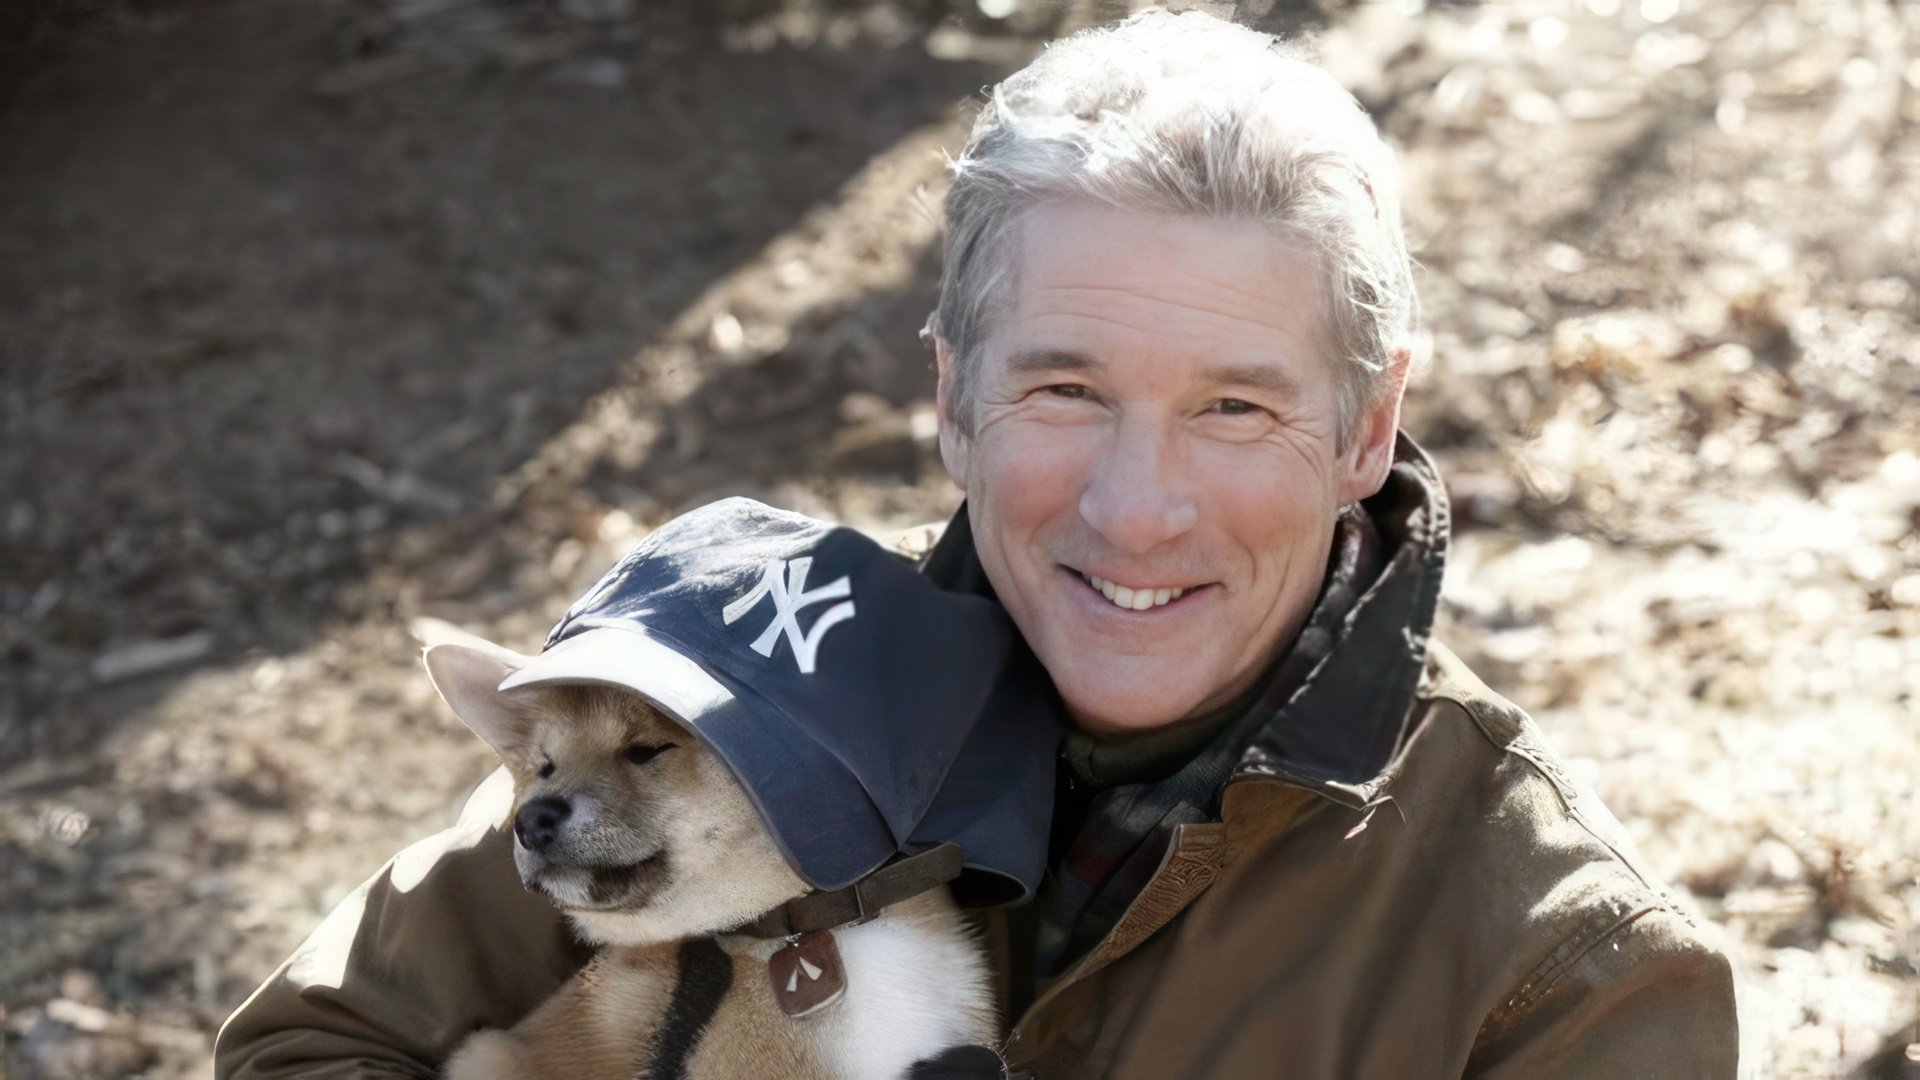 Richard Gere made friends with the puppy playing little Hachi